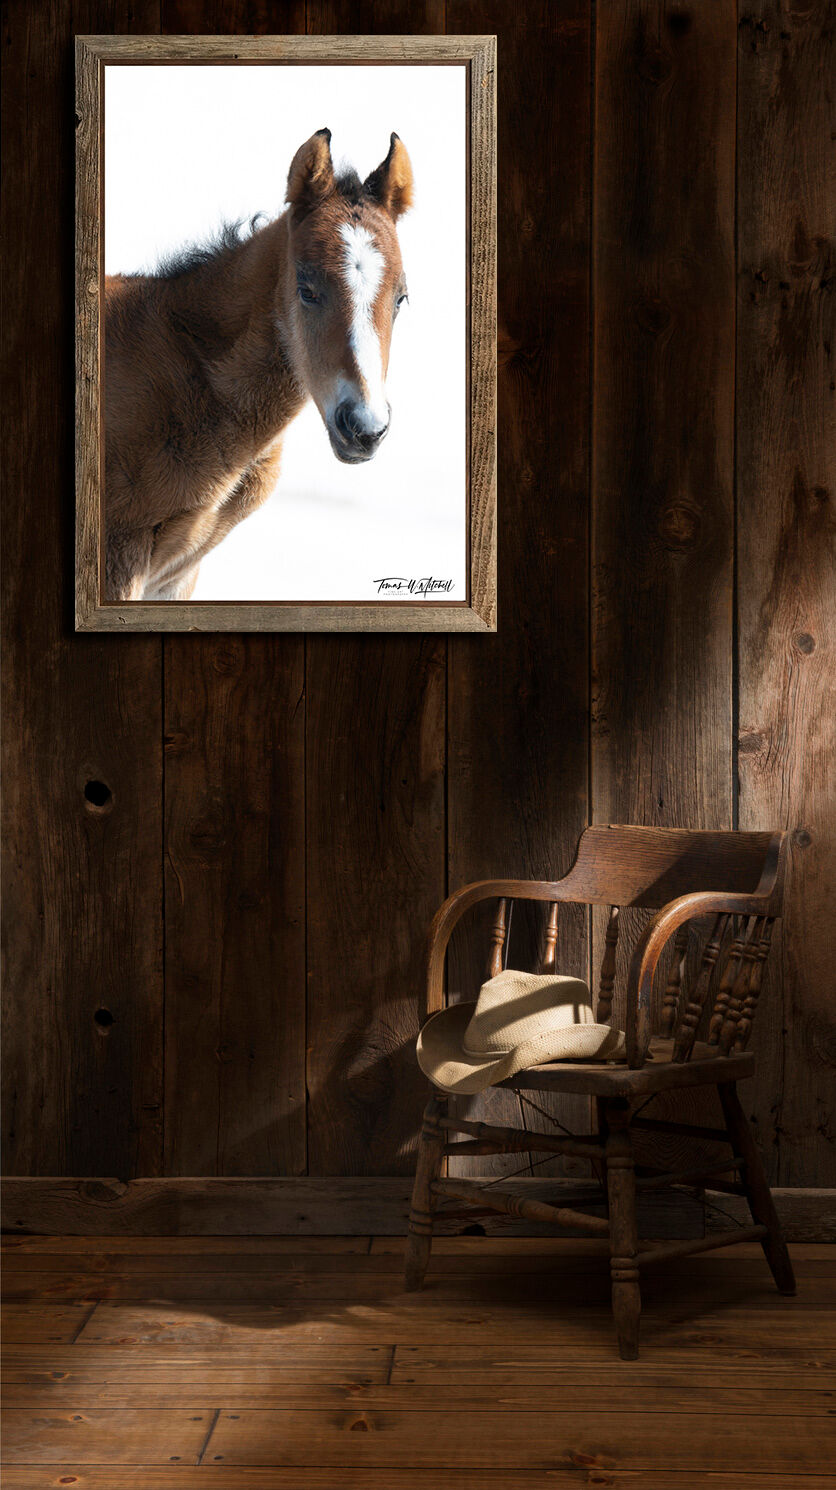 framed photograph of wild horse colt on home wall.